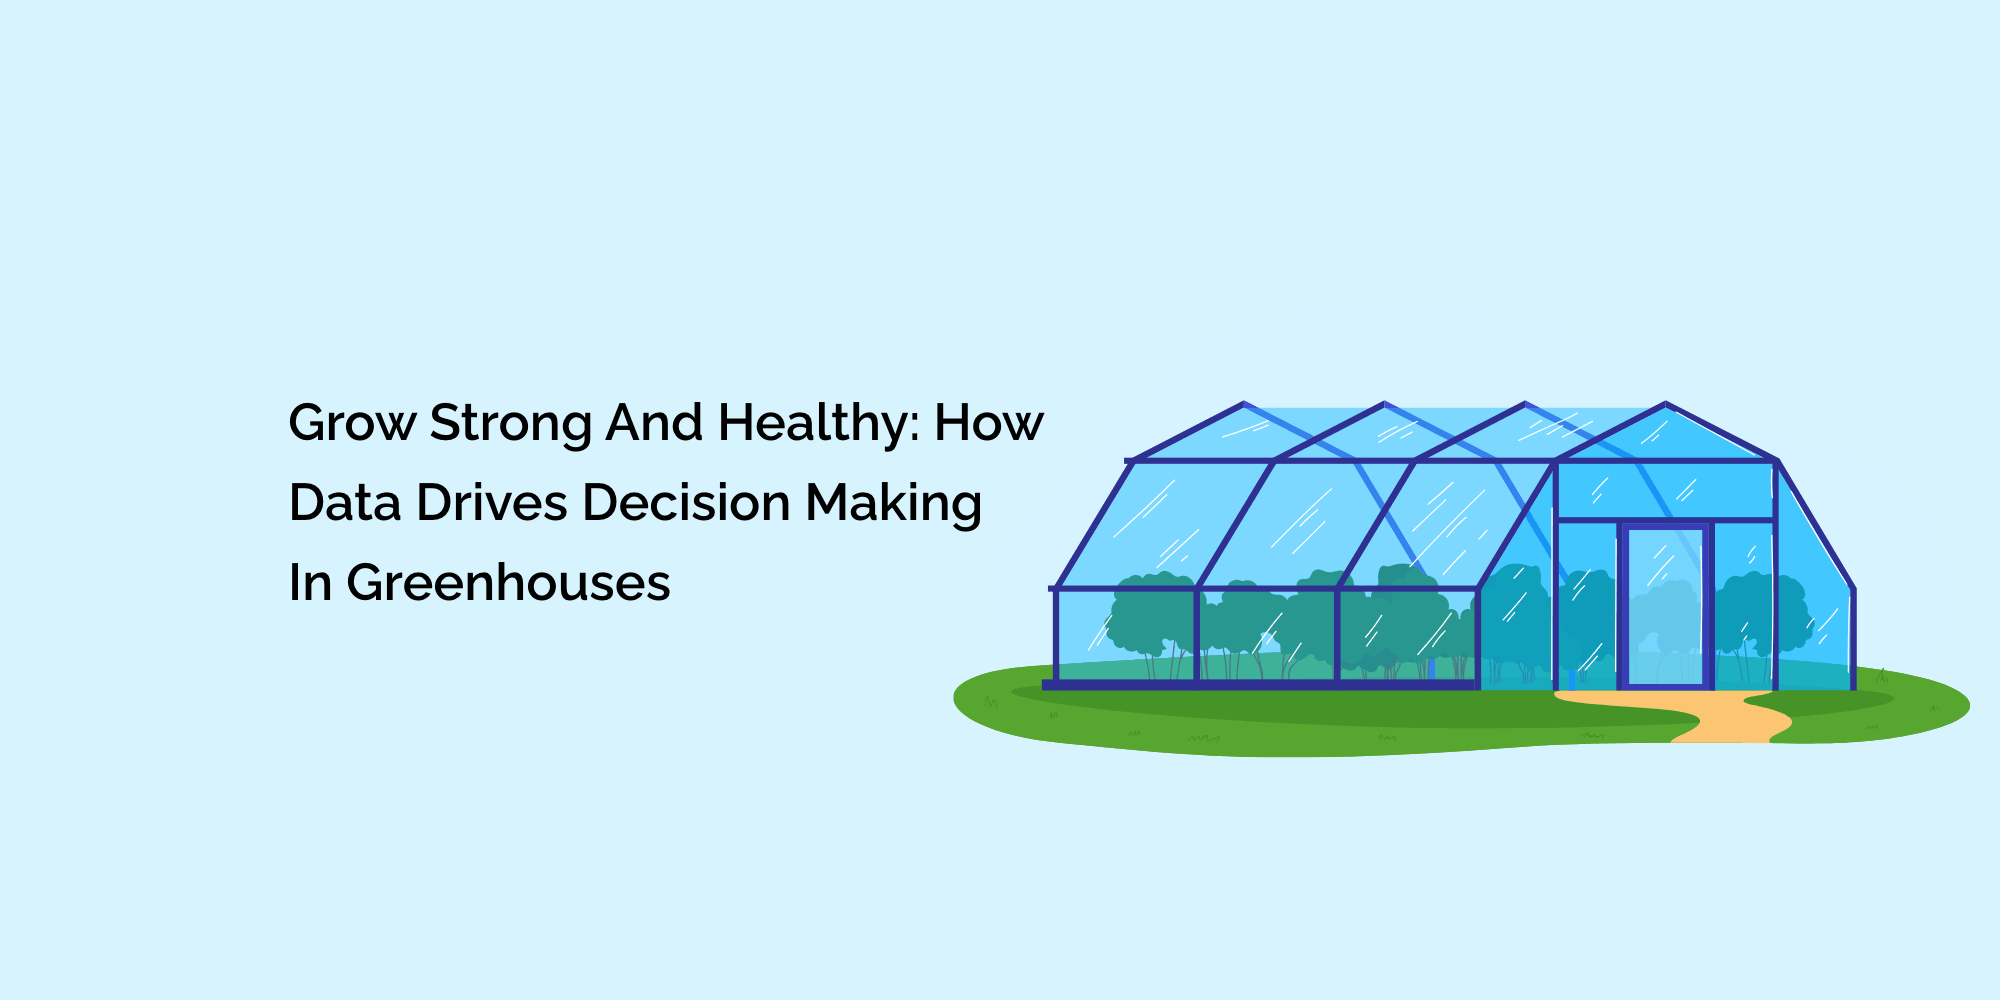 Grow Strong and Healthy: How Data Drives Decision Making in Greenhouses